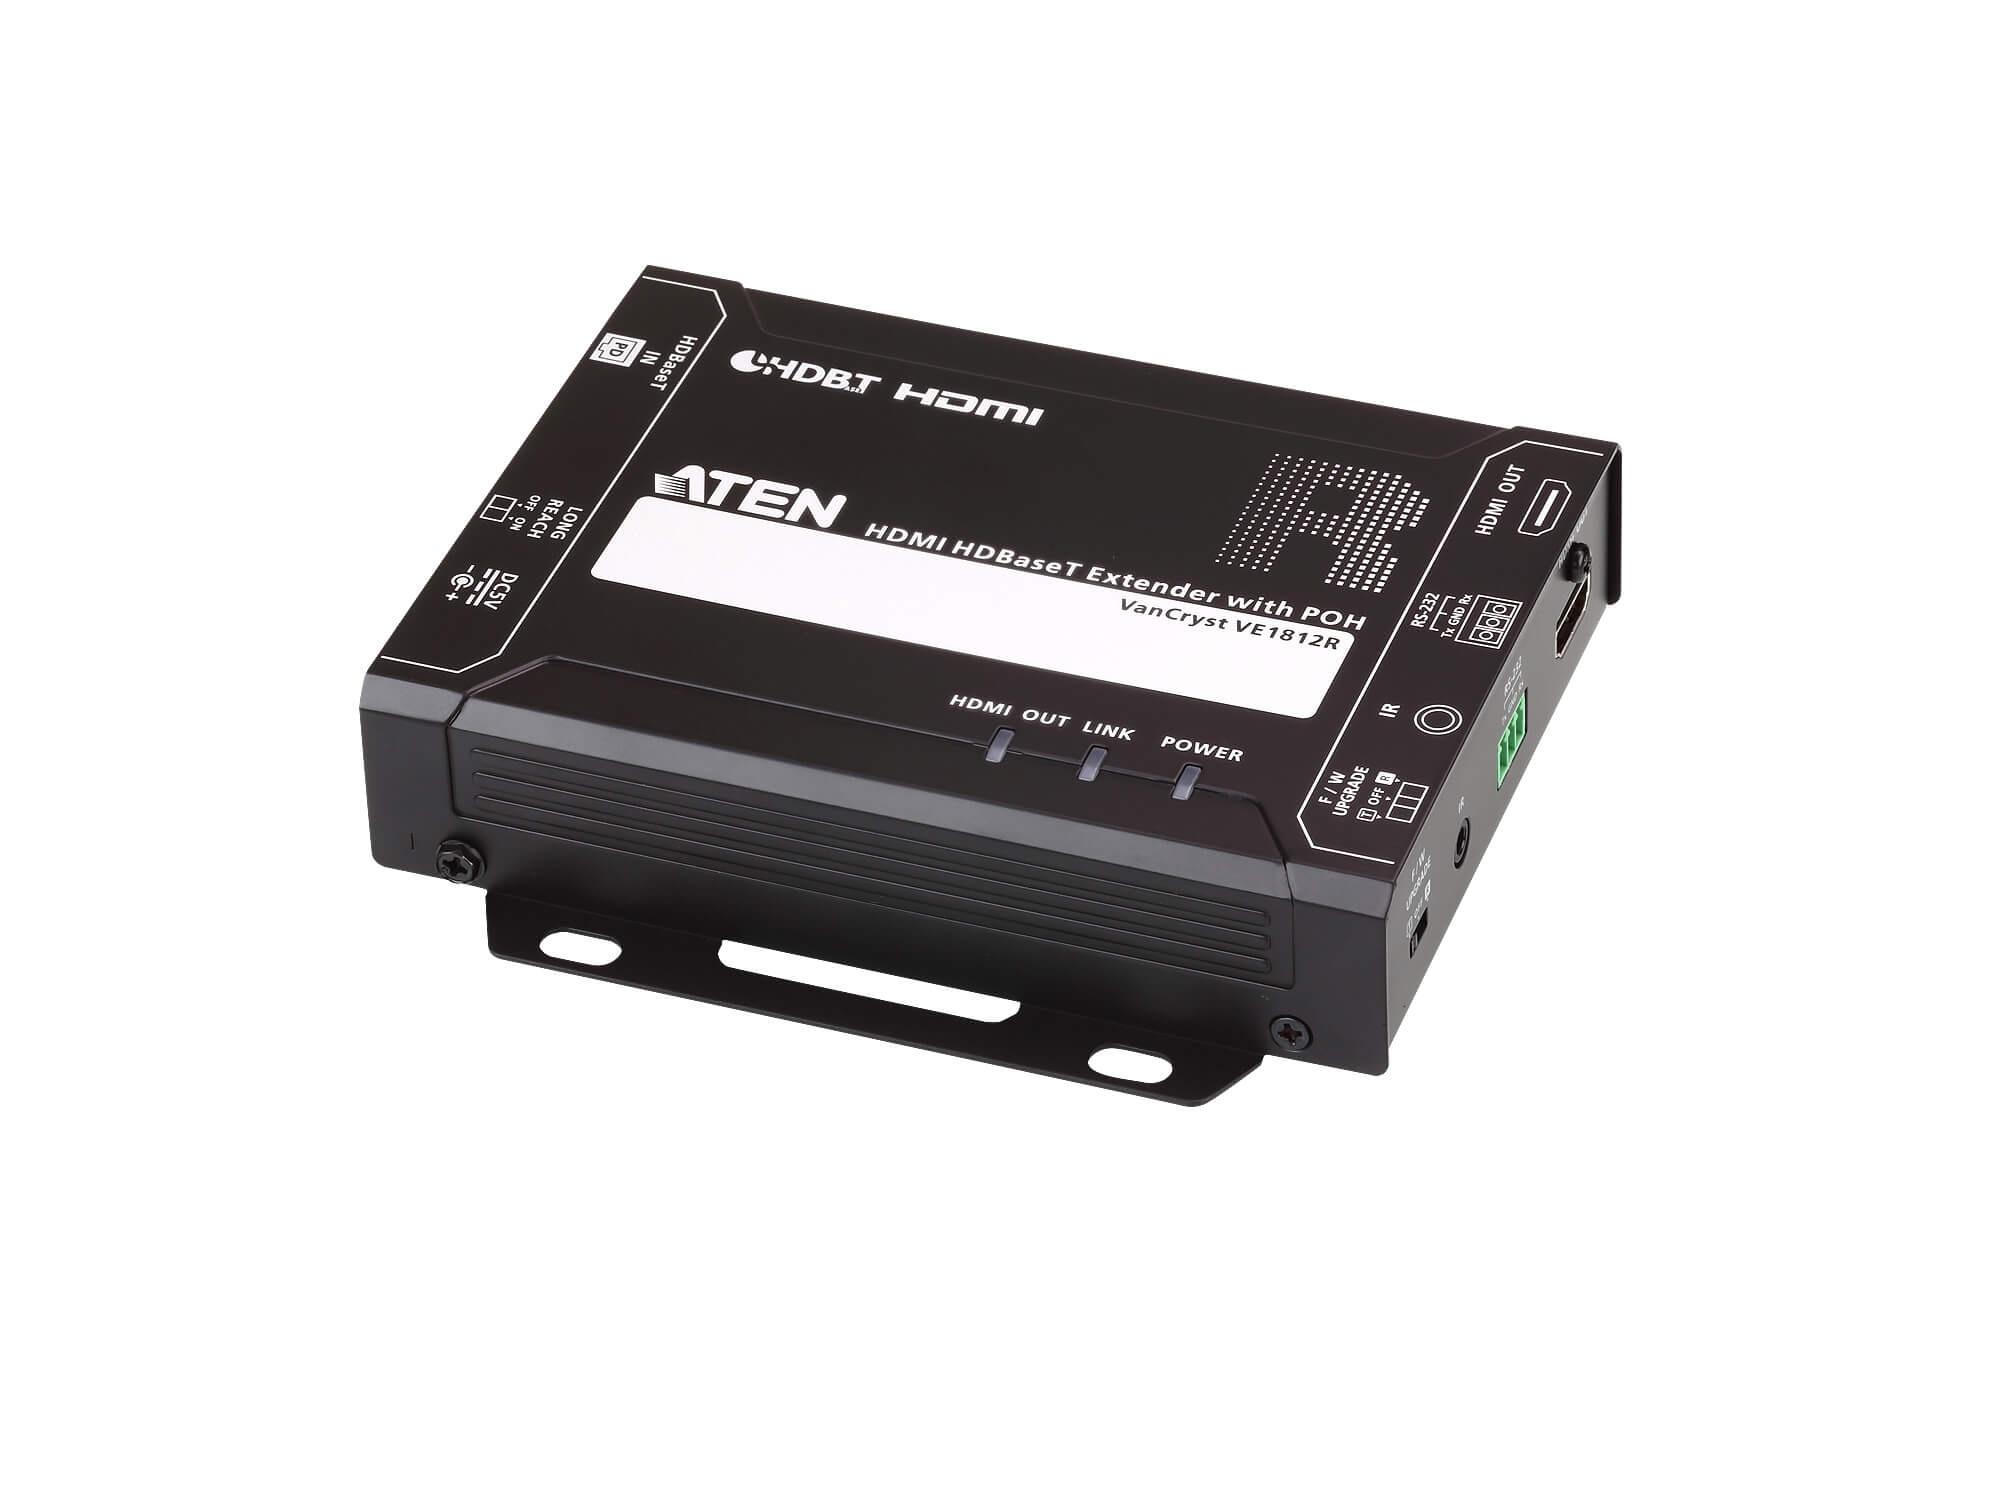 VE1812R HDMI HDBaseT Receiver with POH/4K 100m by Aten